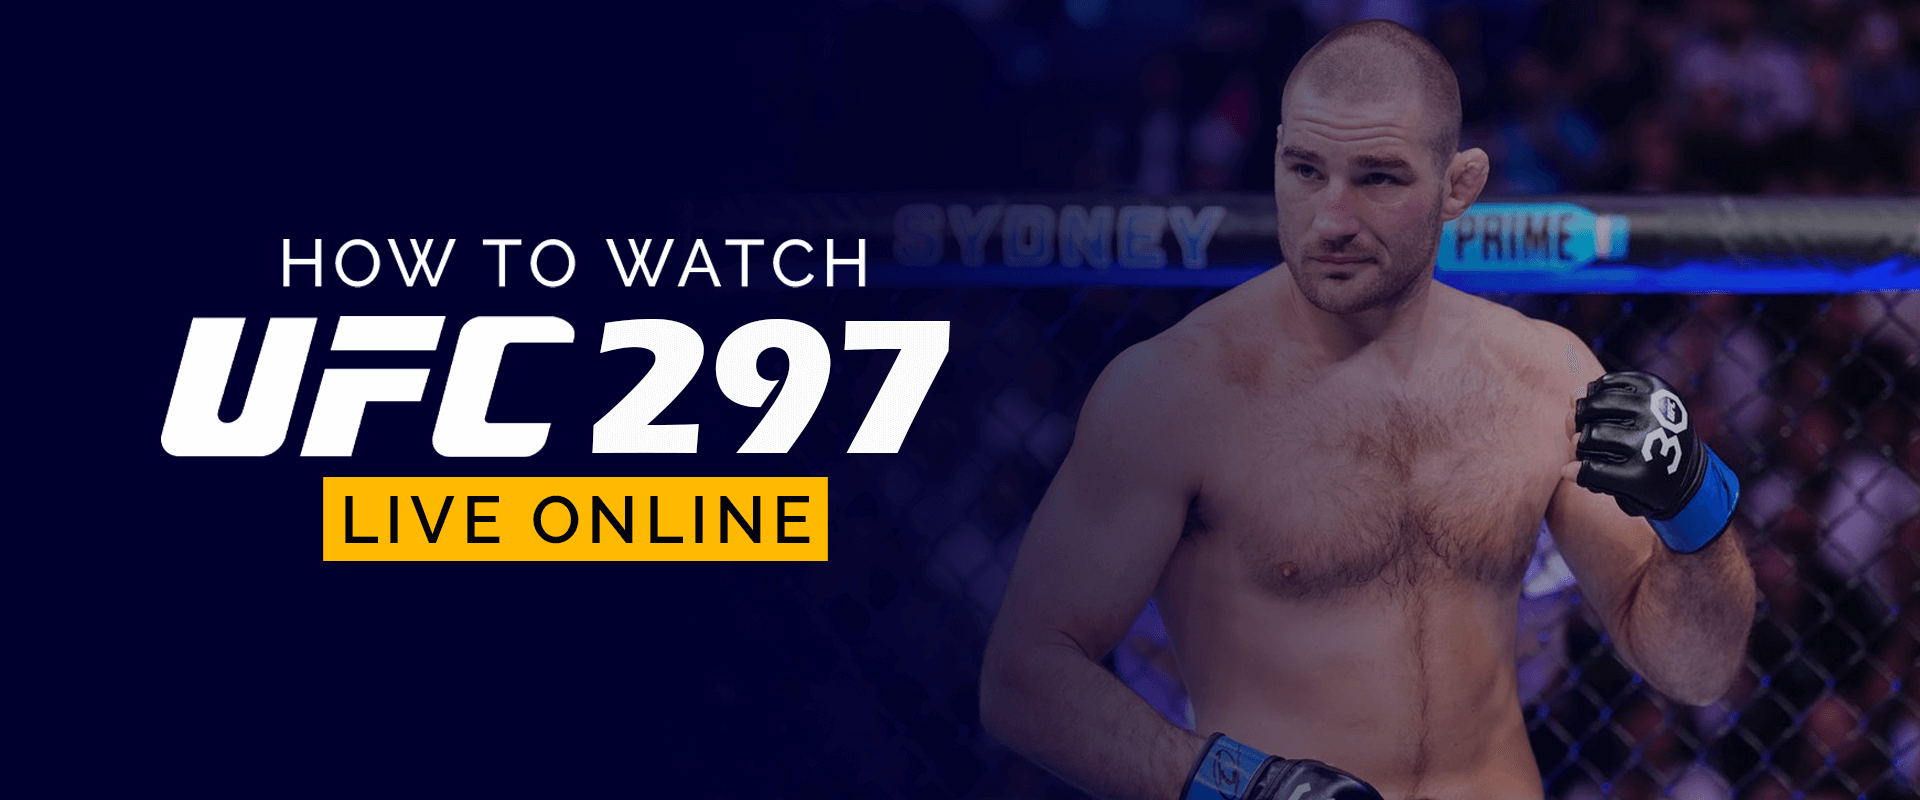 How to Watch UFC 297 Live Online